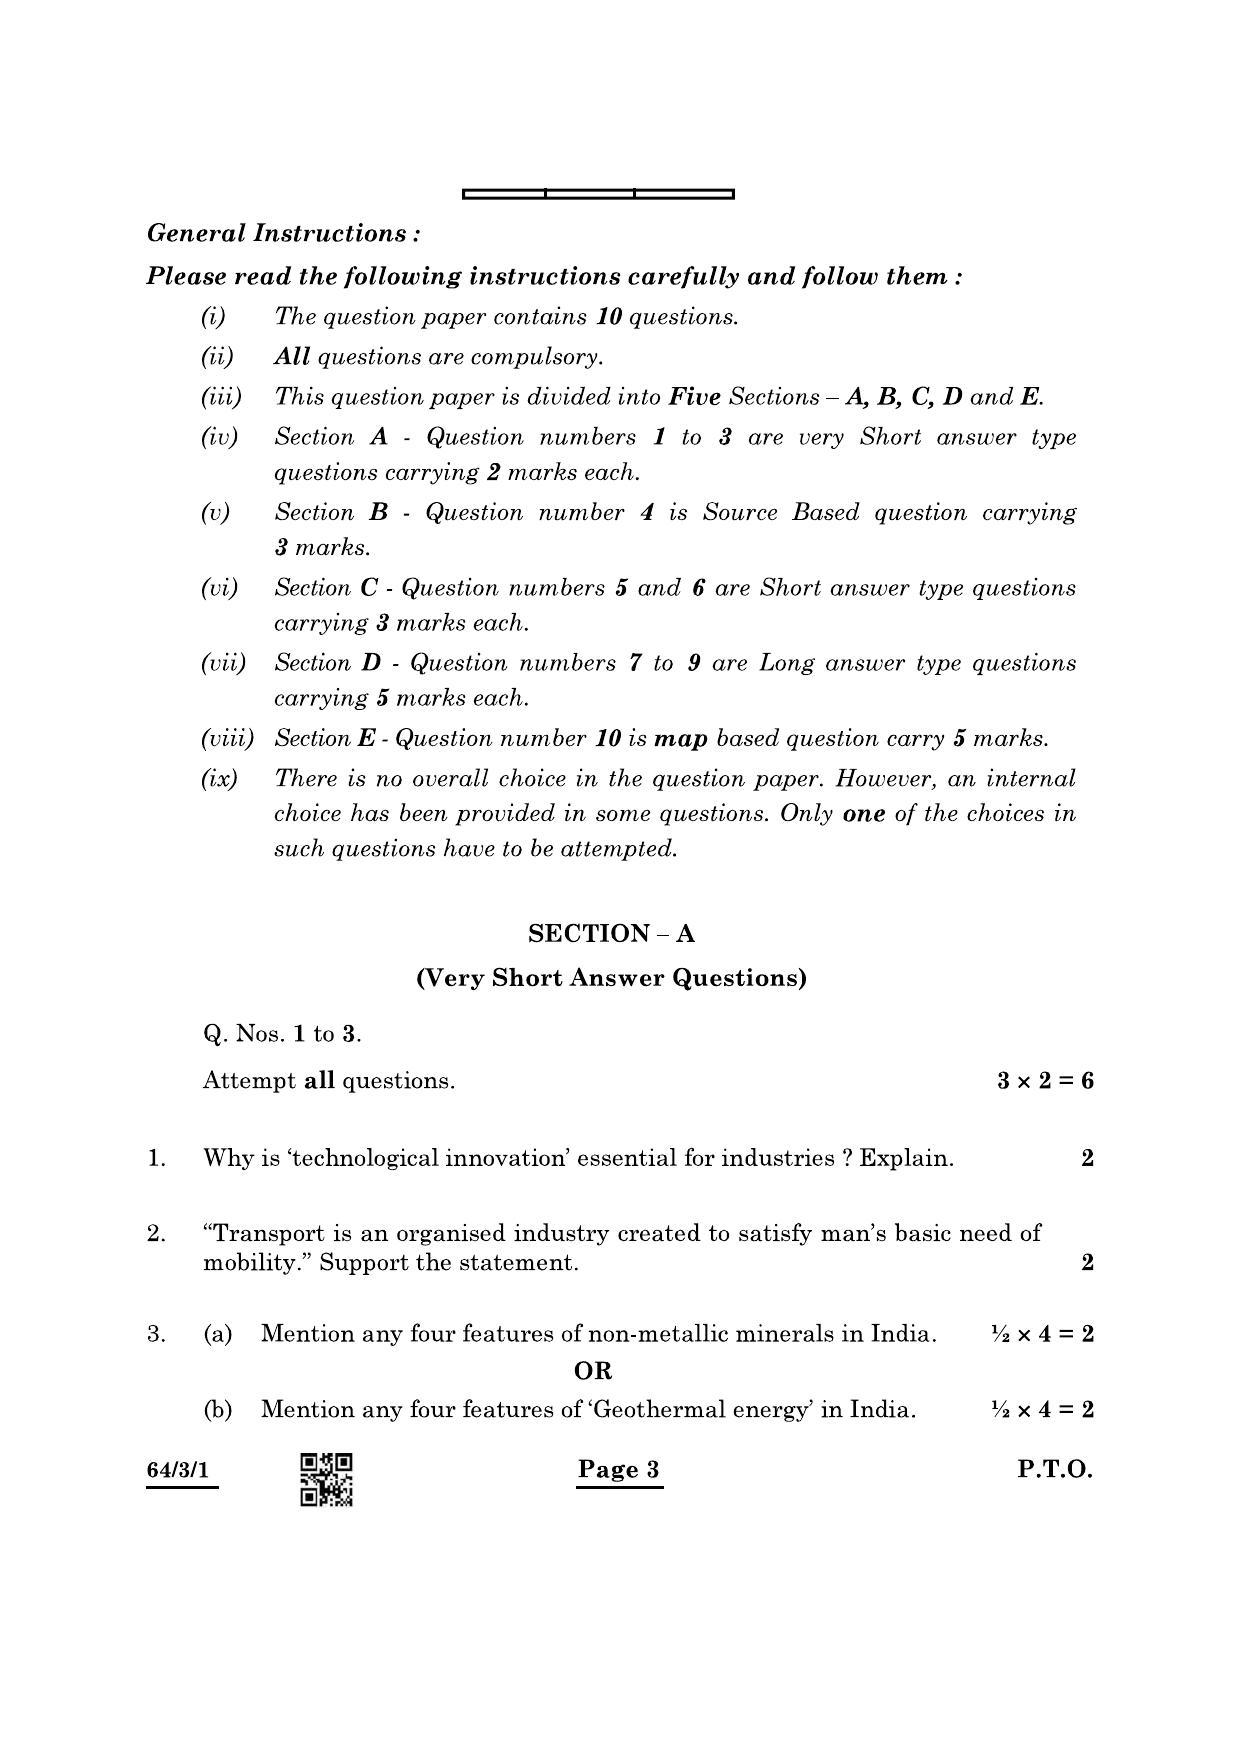 CBSE Class 12 64-3-1 Geography 2022 Question Paper - Page 3